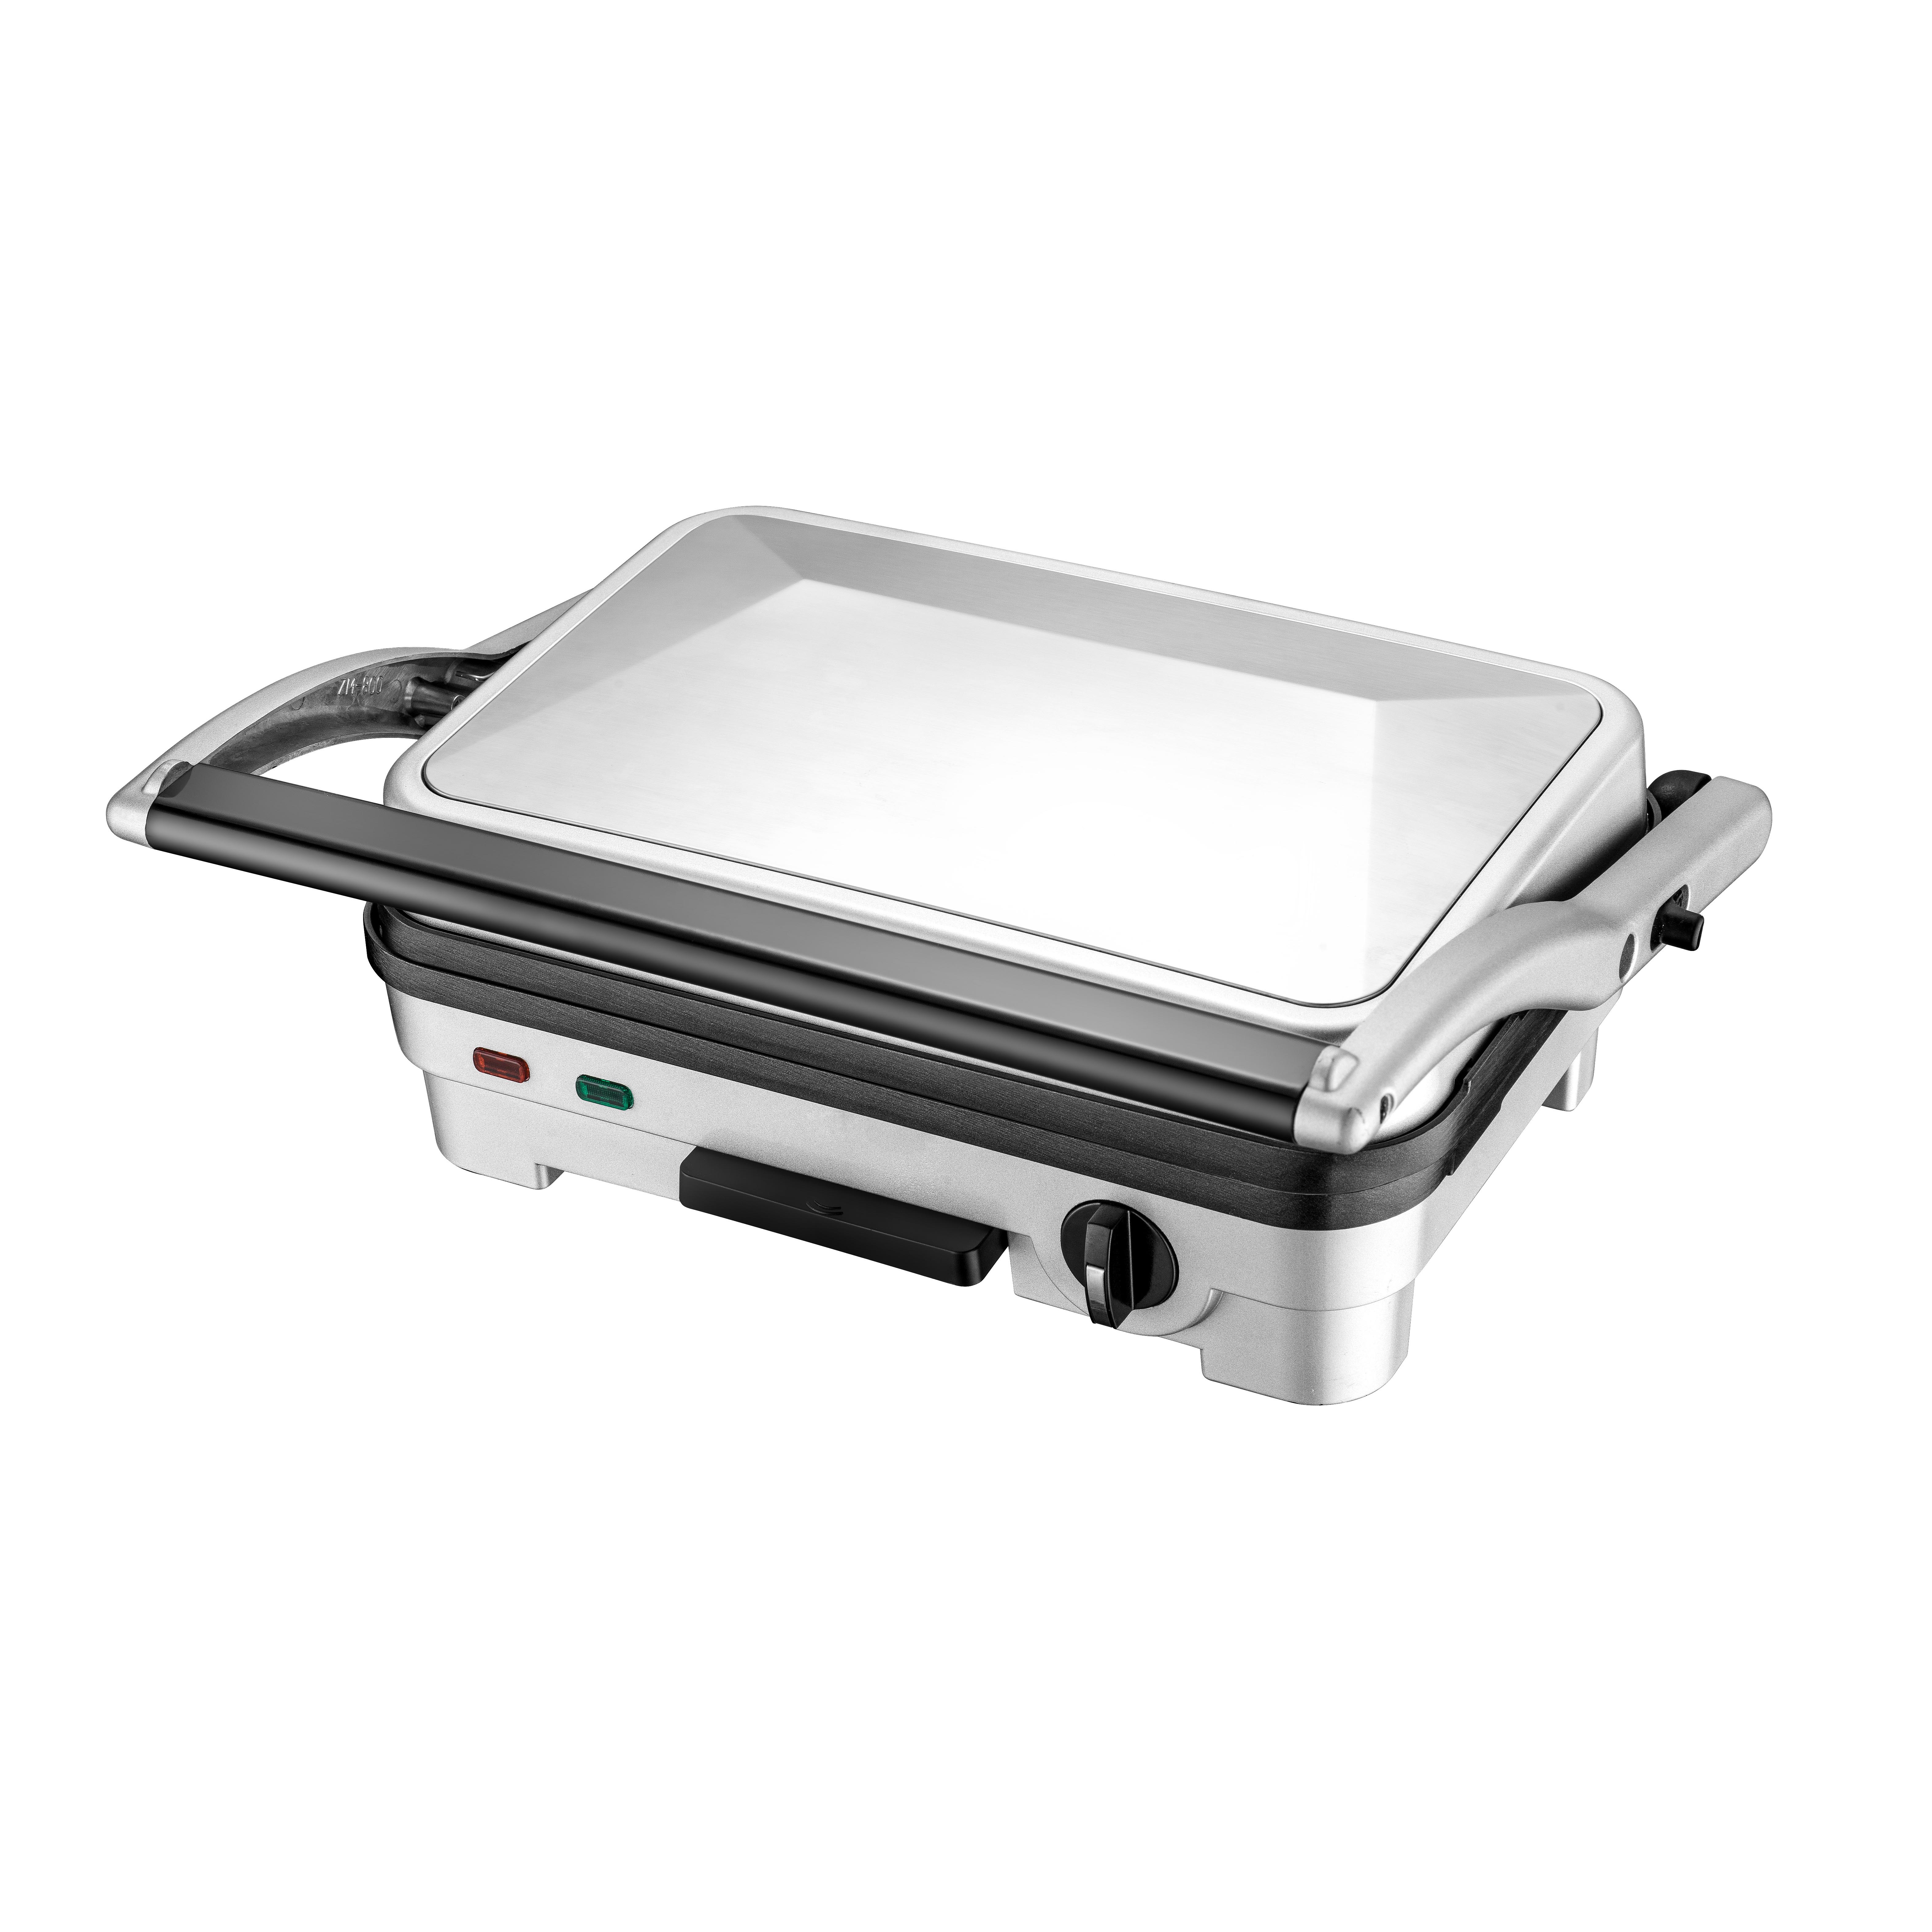 CG-012 Electric Grill